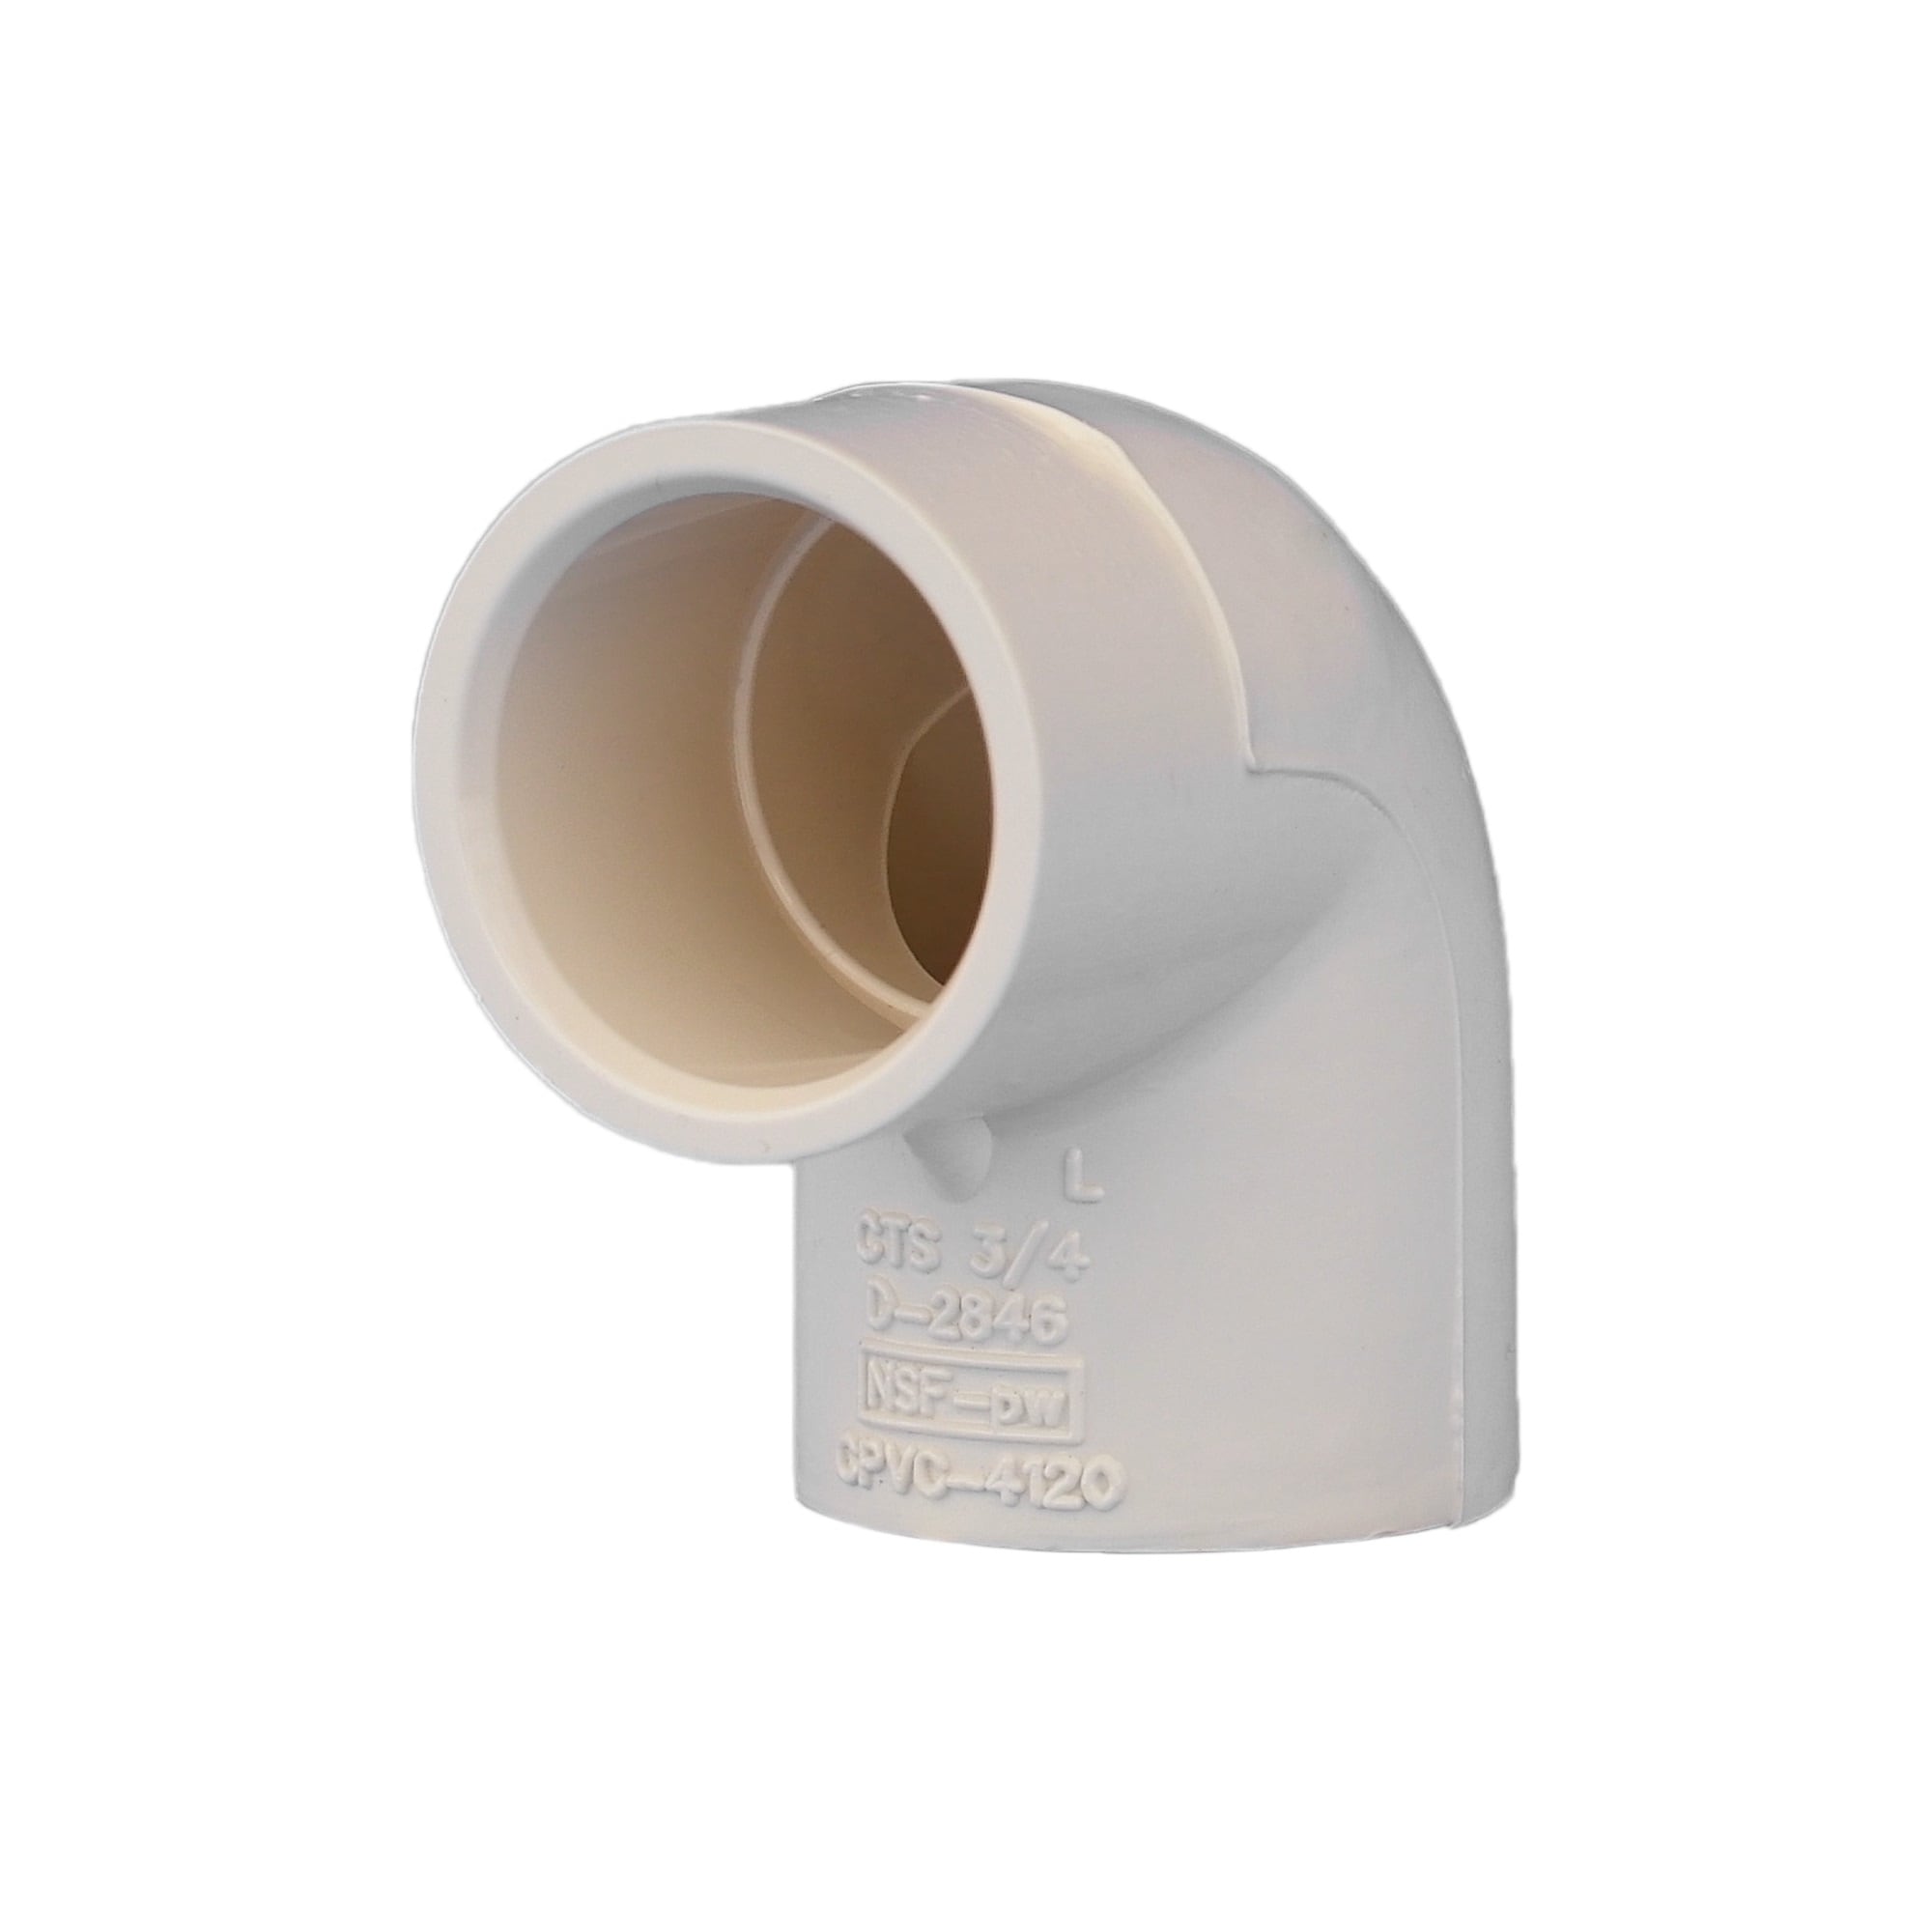 Charlotte Pipe 1-in 90-Degree CPVC Elbow for Potable Water - Cream Colored, 1 CTS CPVC Elbow 90 Degree, Maximum Pressure 100 PSI | CTS 02300 1000 -  CTS023001000